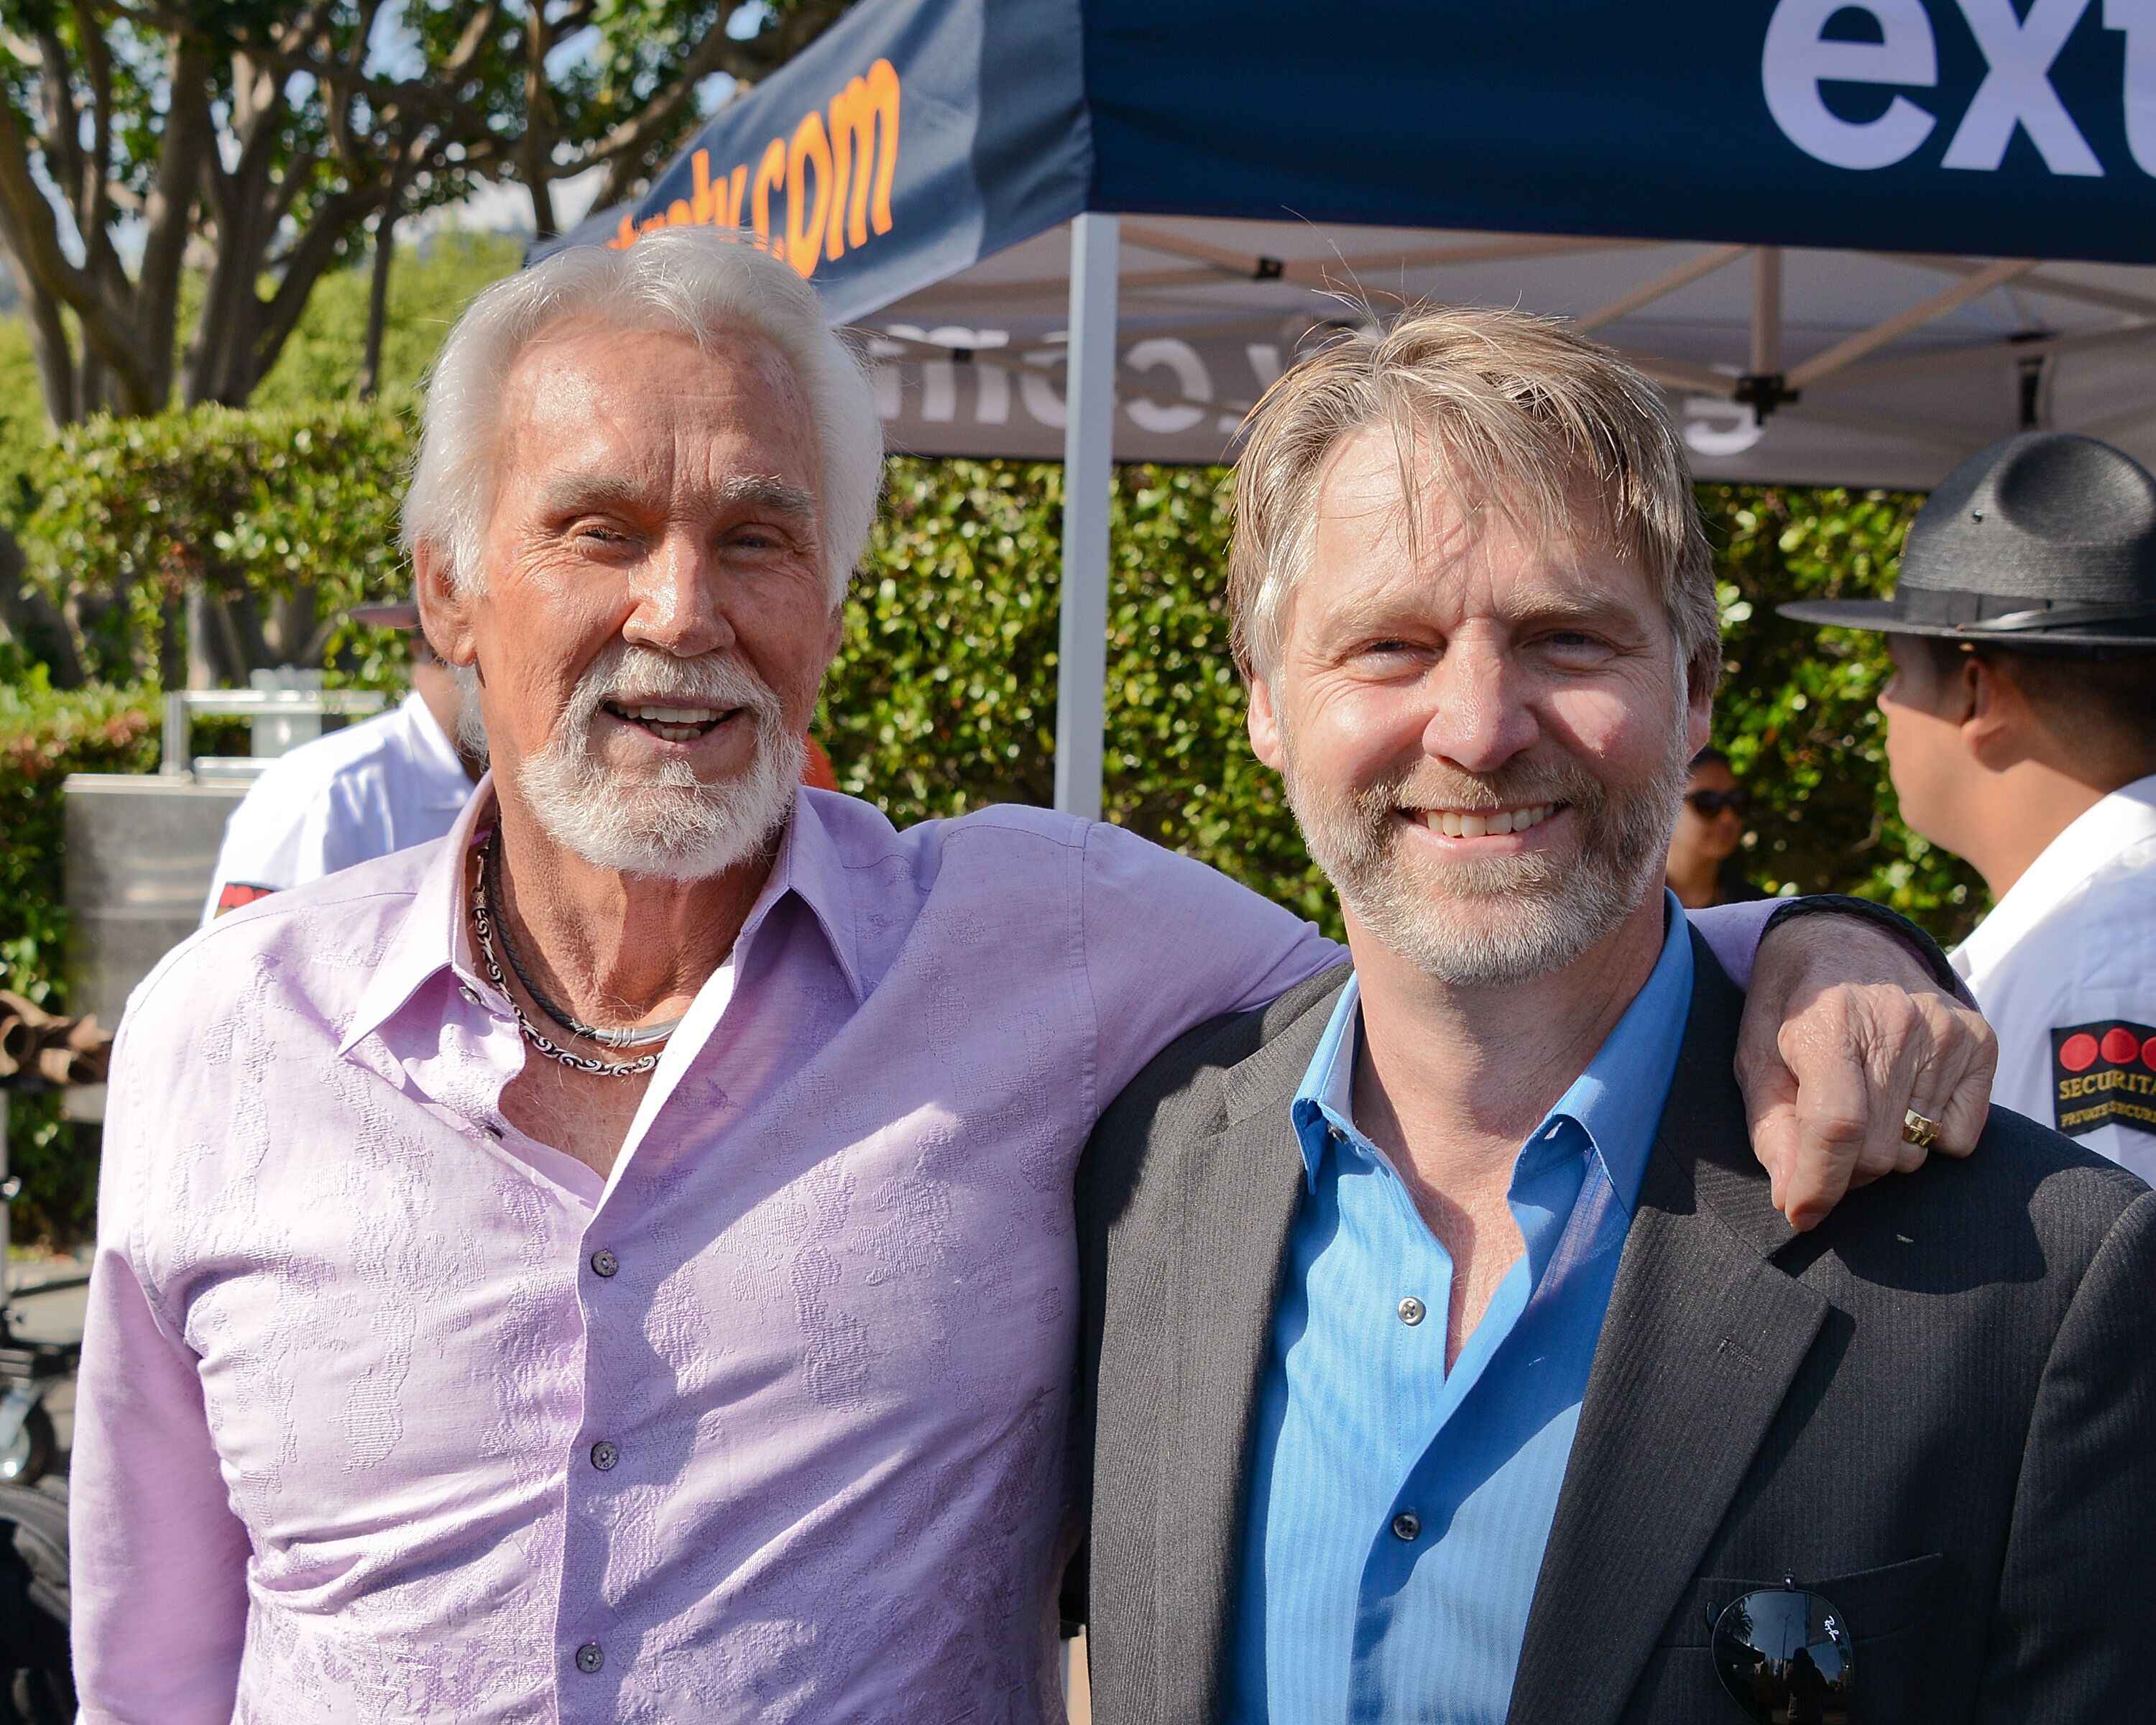 Kenny Rogers and his son actor Kenny Rogers Jr at Universal Studios Hollywood in 2013 | Source: Getty Images